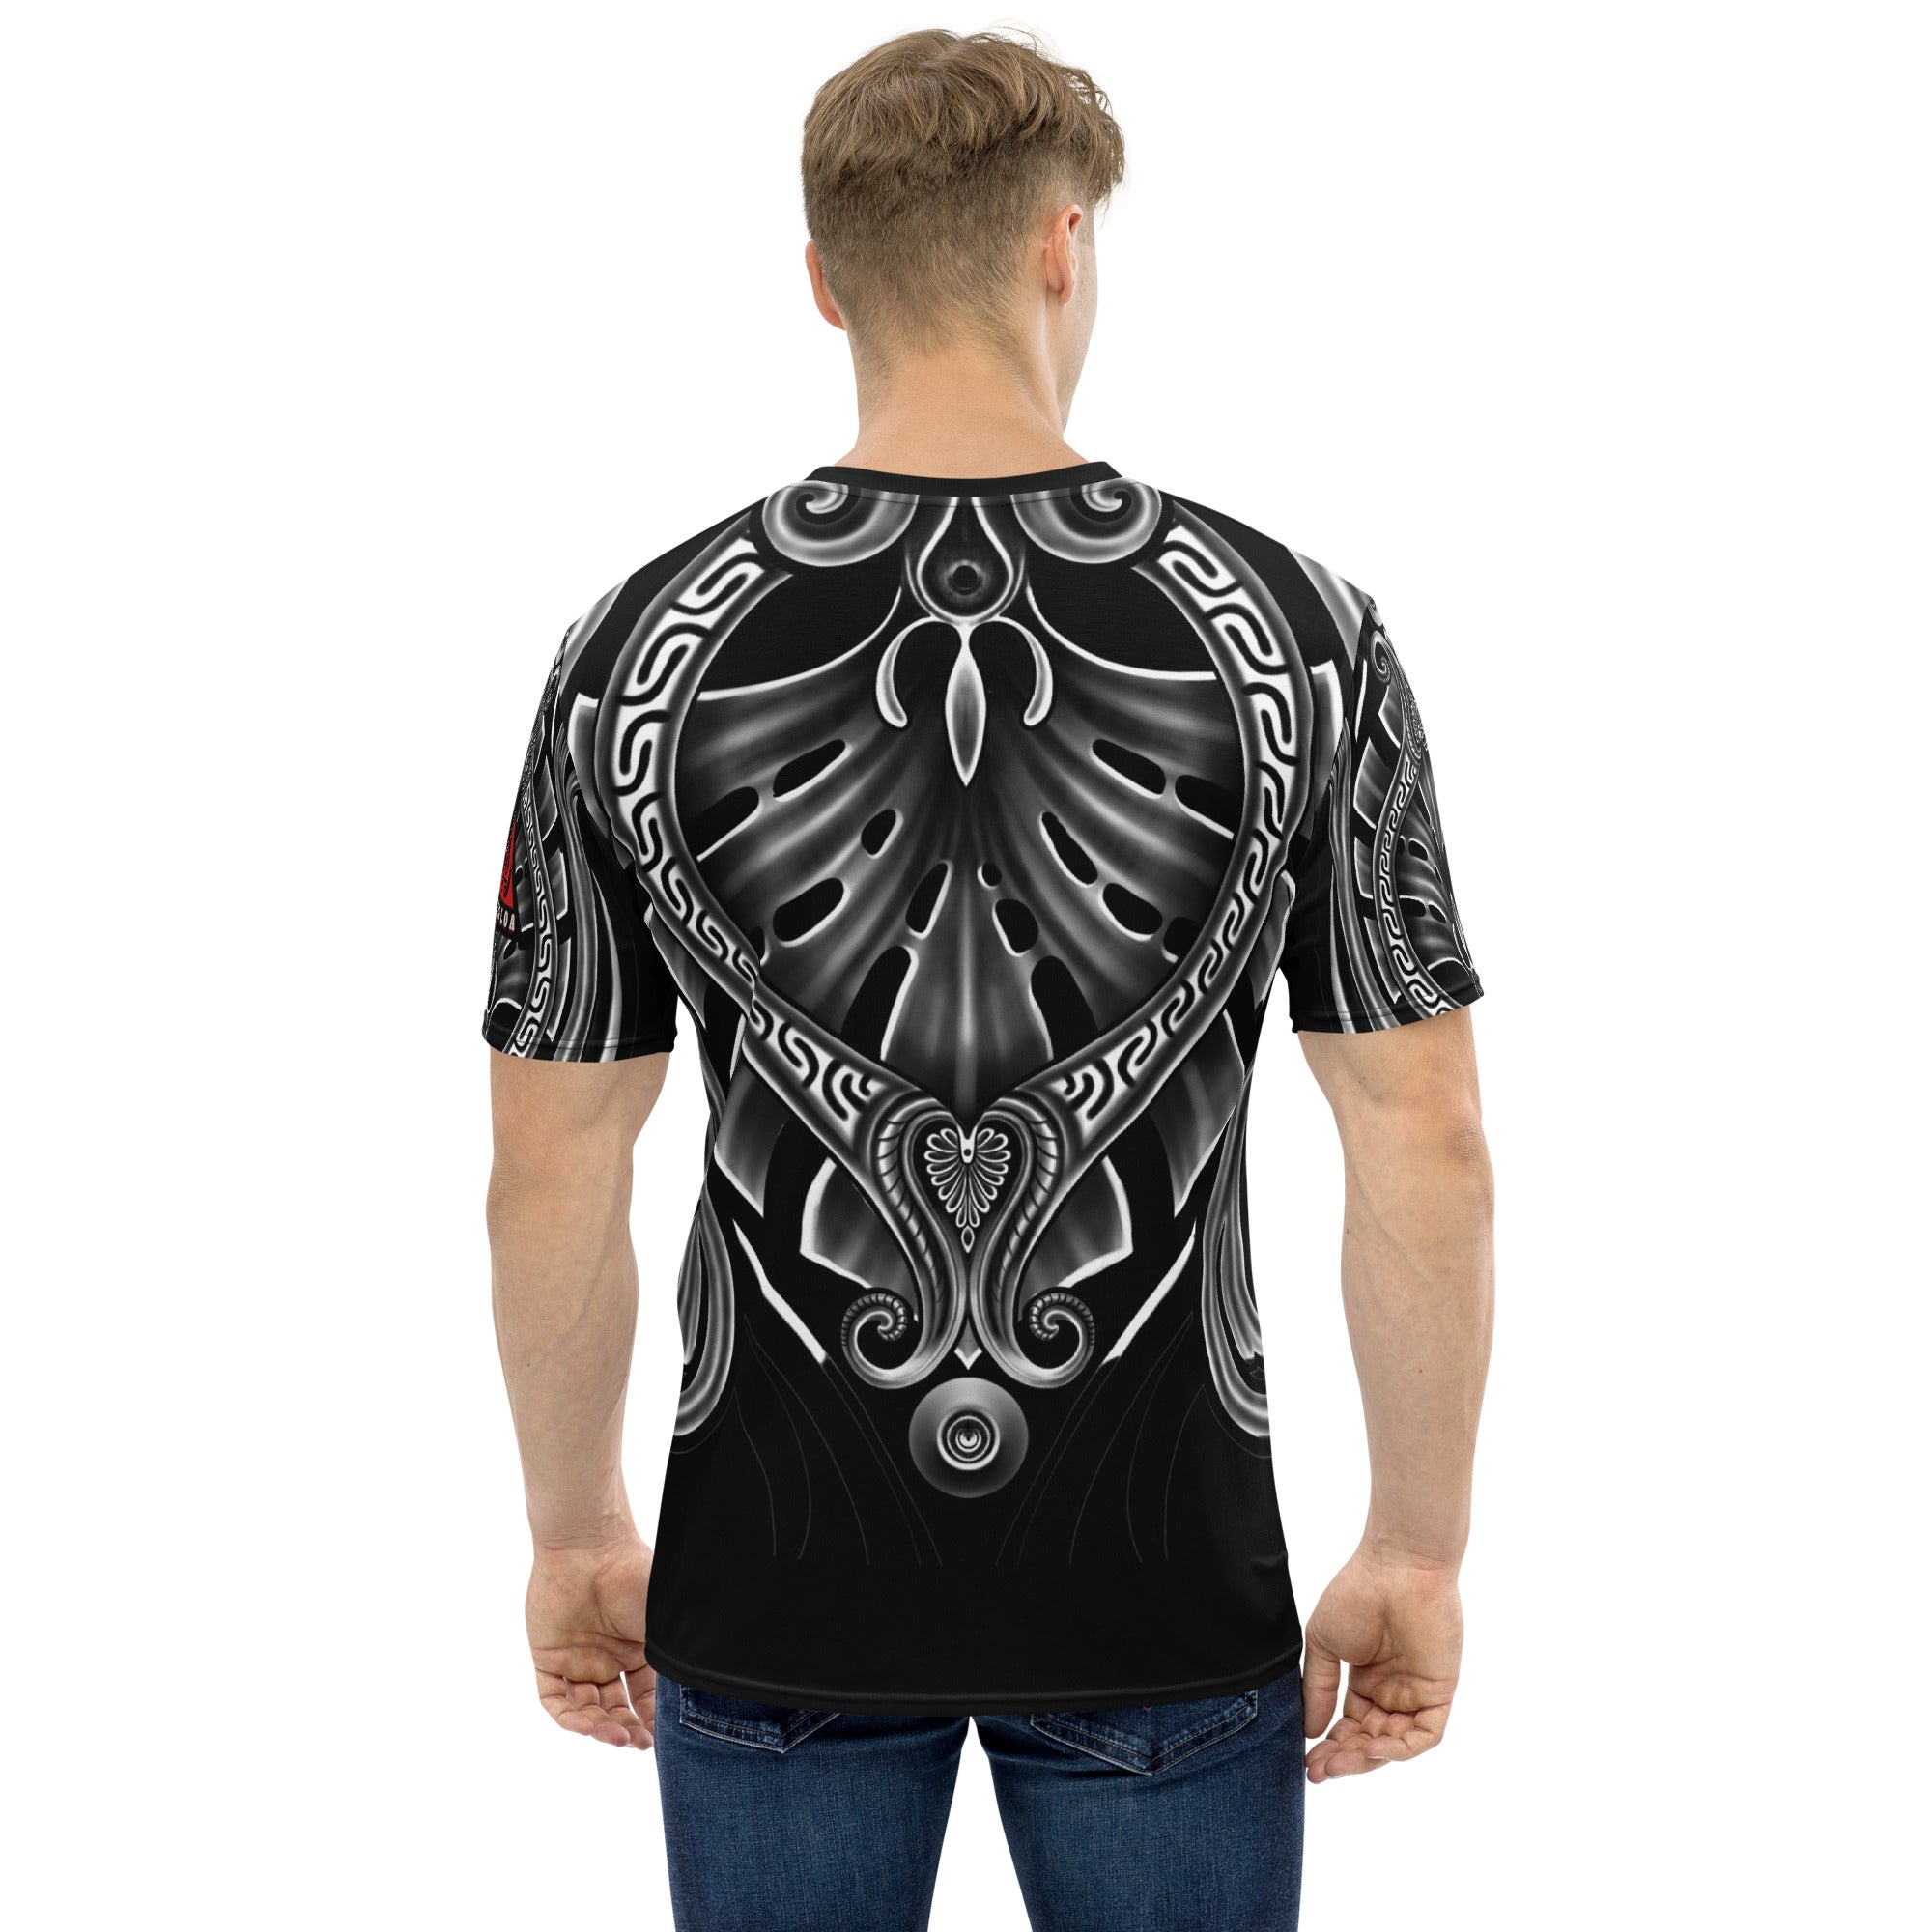 Snake tattoo flash clothes. Tshirt inspired by tattoos | Cool shirt  designs, Startup clothing, Cool shirts